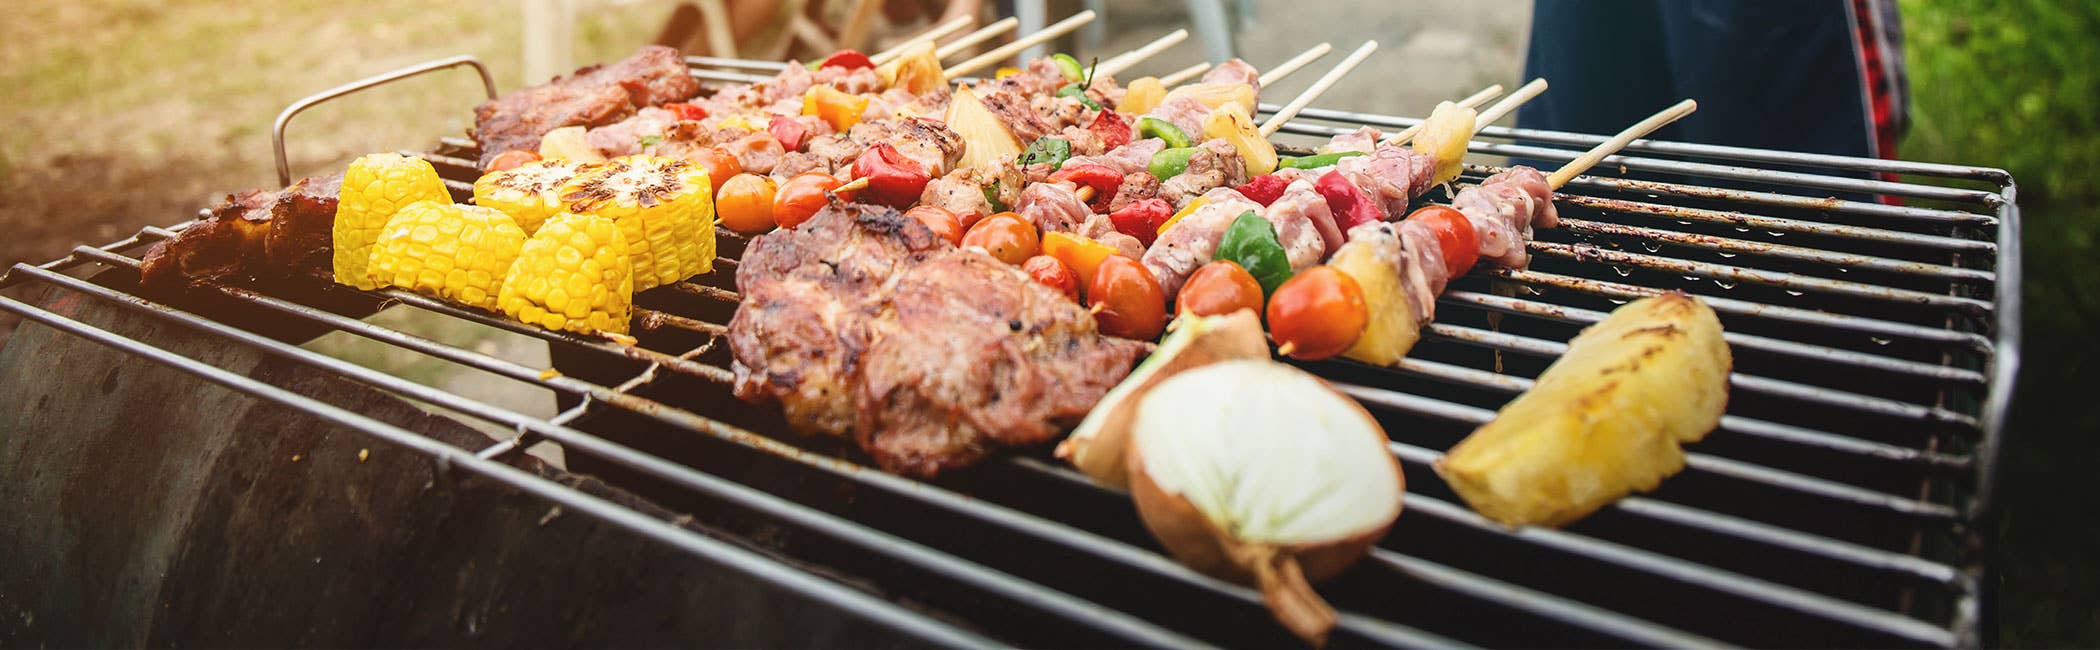 Hosting A BBQ Party: Essential Supplies You Need To Have